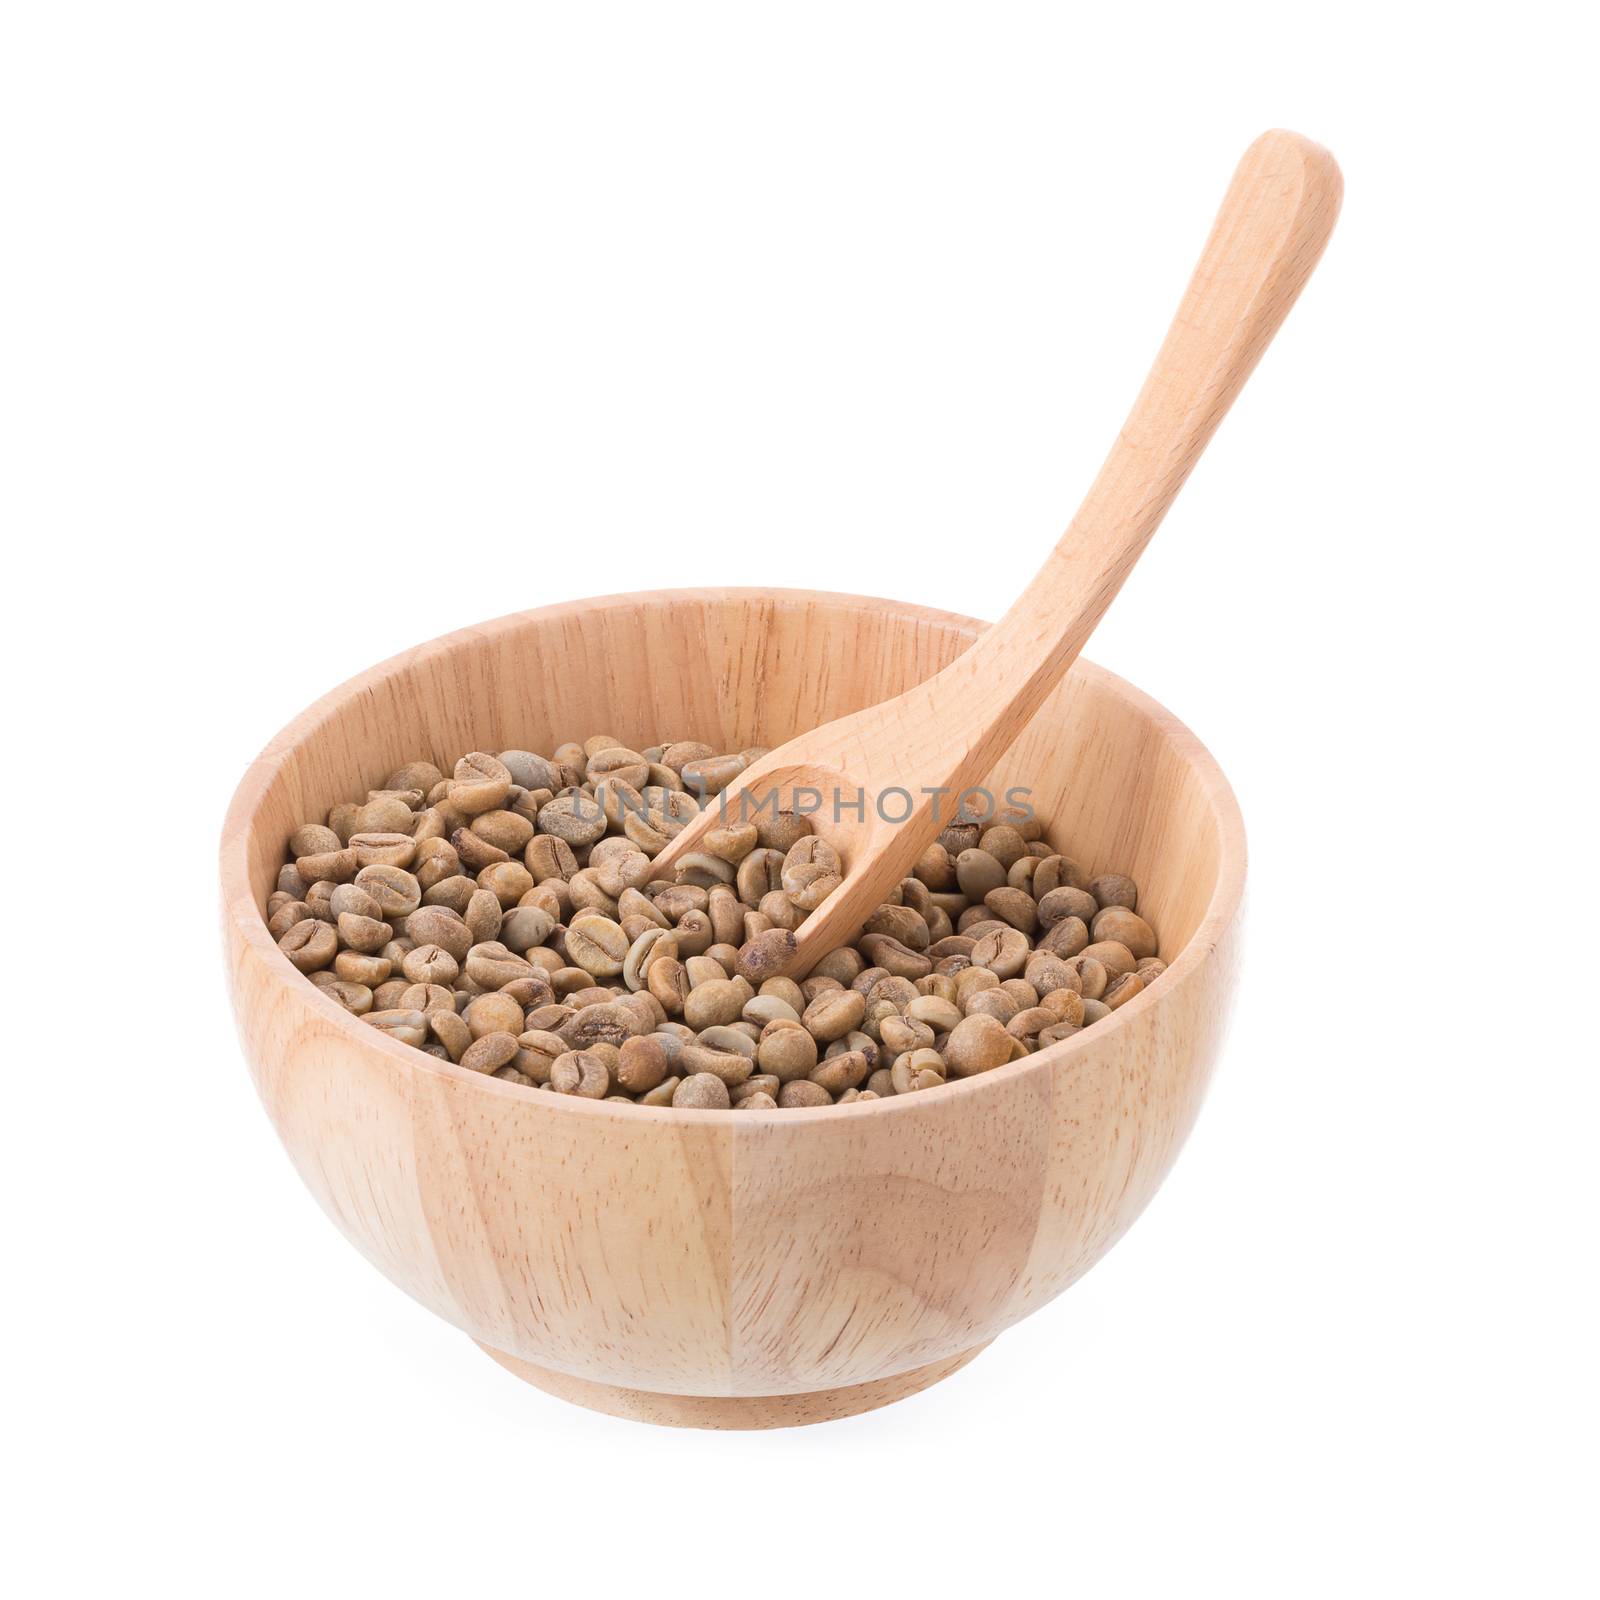 Green Arabica coffee beans in a wooden bowl Isolated on a white  by kaiskynet